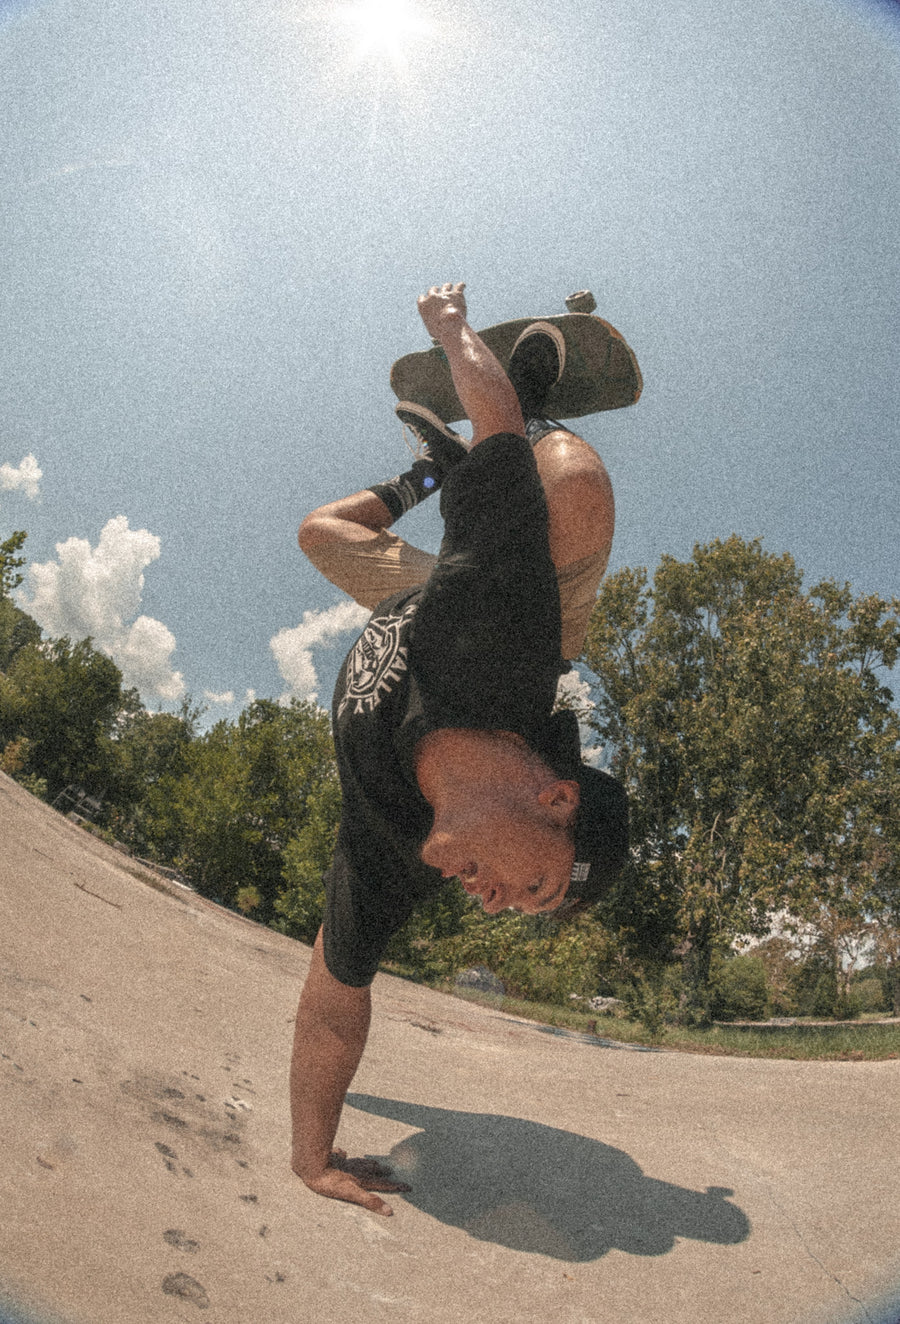 Skateboarder in shorts, black Dirty Donny x Mike Vallely Logo Tee, backwards Dirty Donny x Mike Vallely Cap, and khaki shorts doing a one-handed headstand with his skateboard in the air. He is wearing the black colorway of the Dirty Donny x Mike Vallely Collaboration Crew Socks.